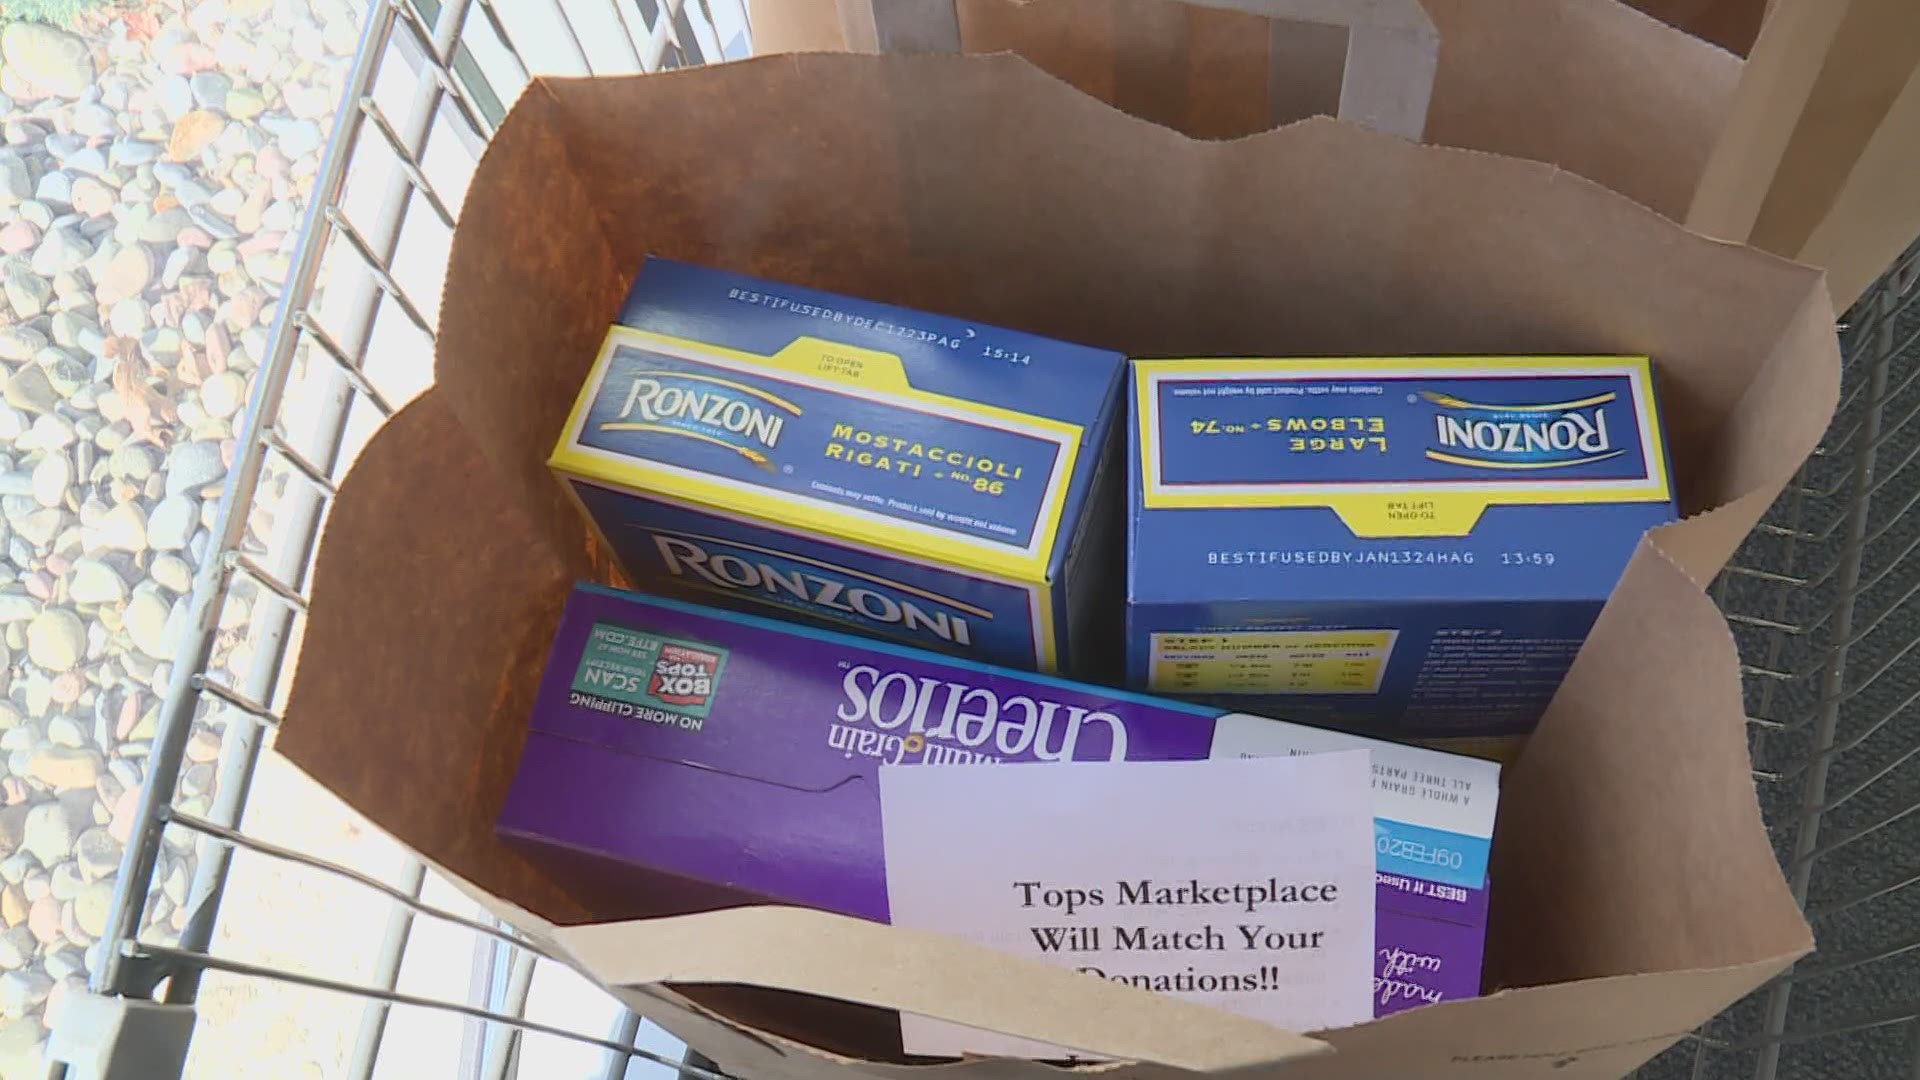 Destroyed by fire in 2019, Tops Marketplace teamed up with the Southington Rotary Club to help those in need.